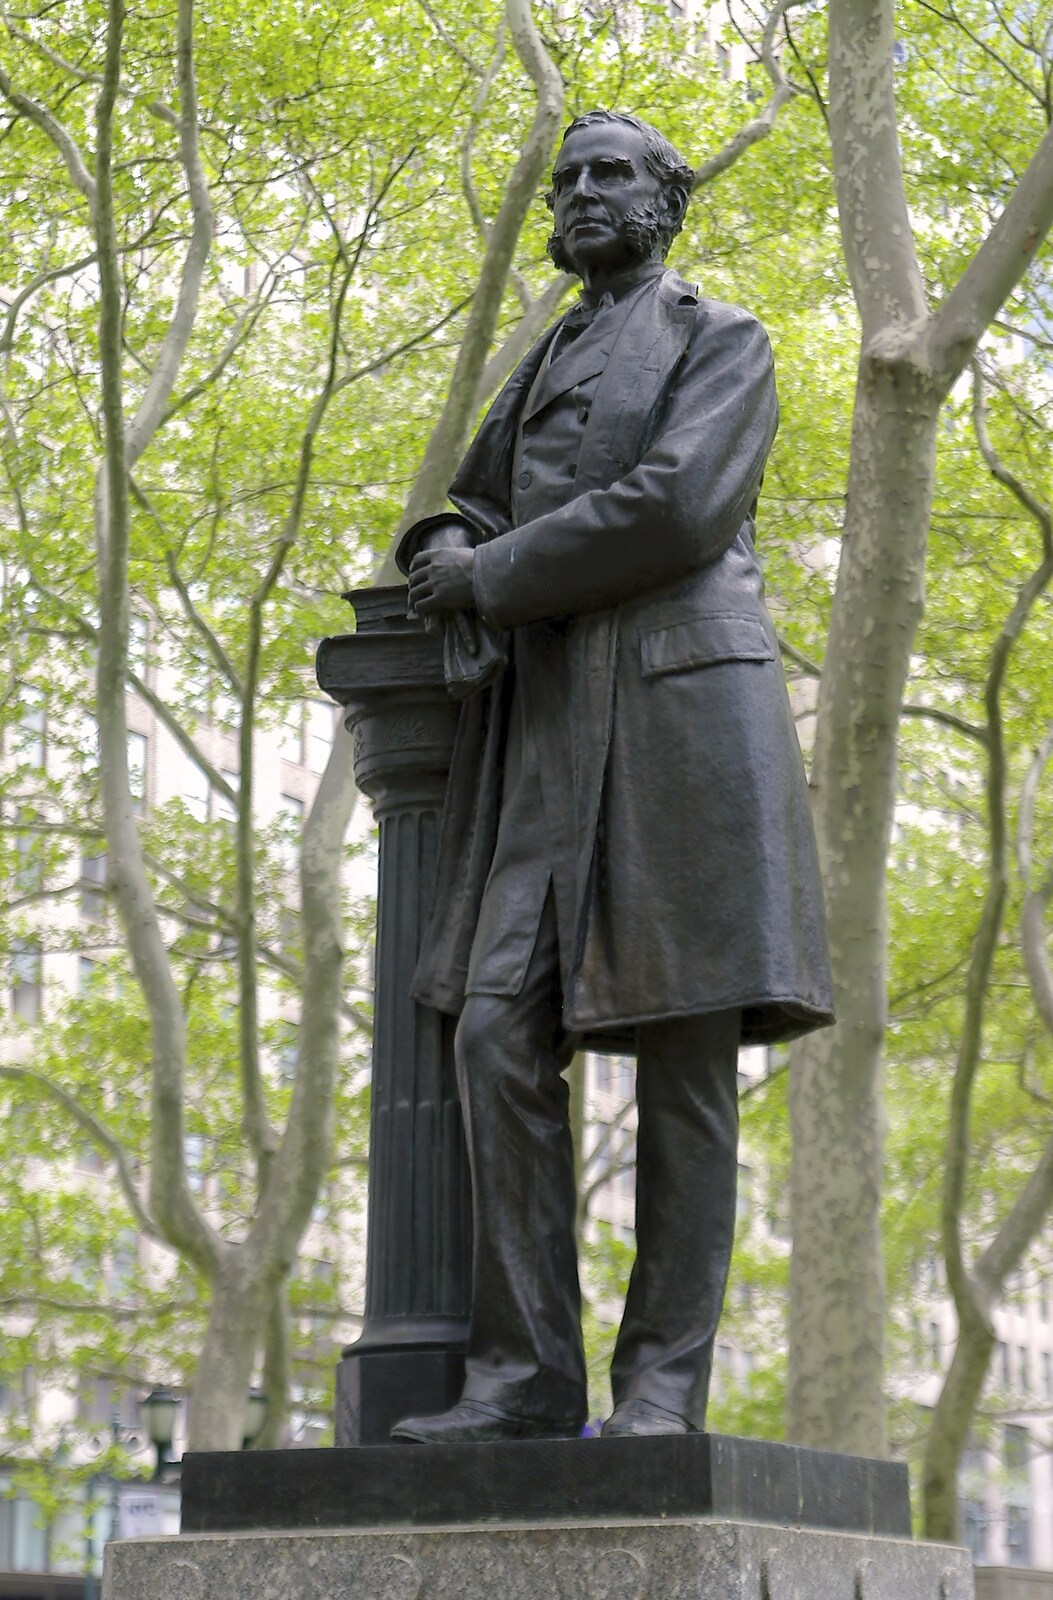 A statue of some dude from A Union Square Demo, Bryant Park and Columbus Circle, New York, US - 2nd May 2006